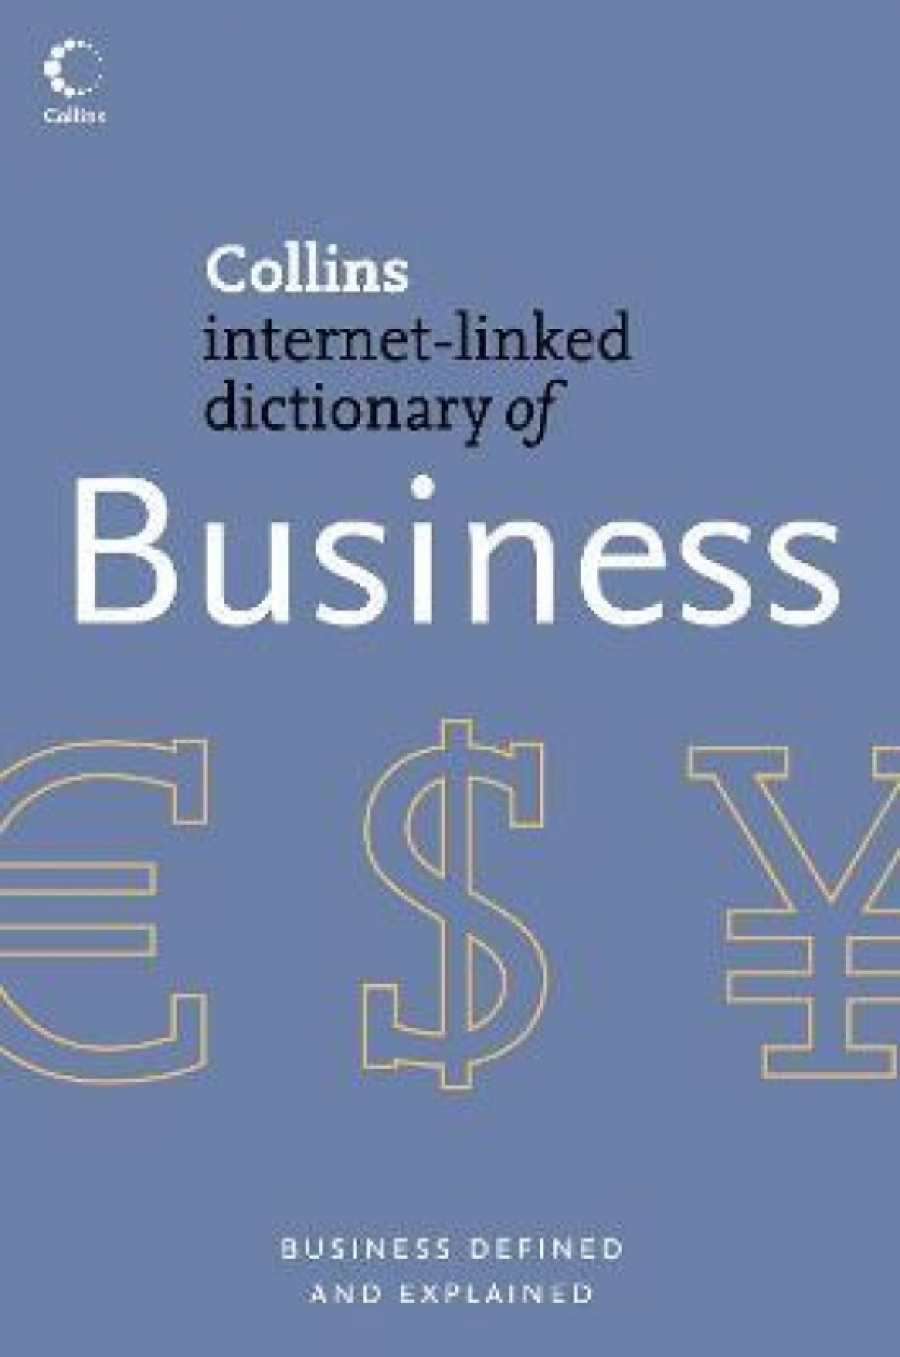 Collins Dict Business NewEd 